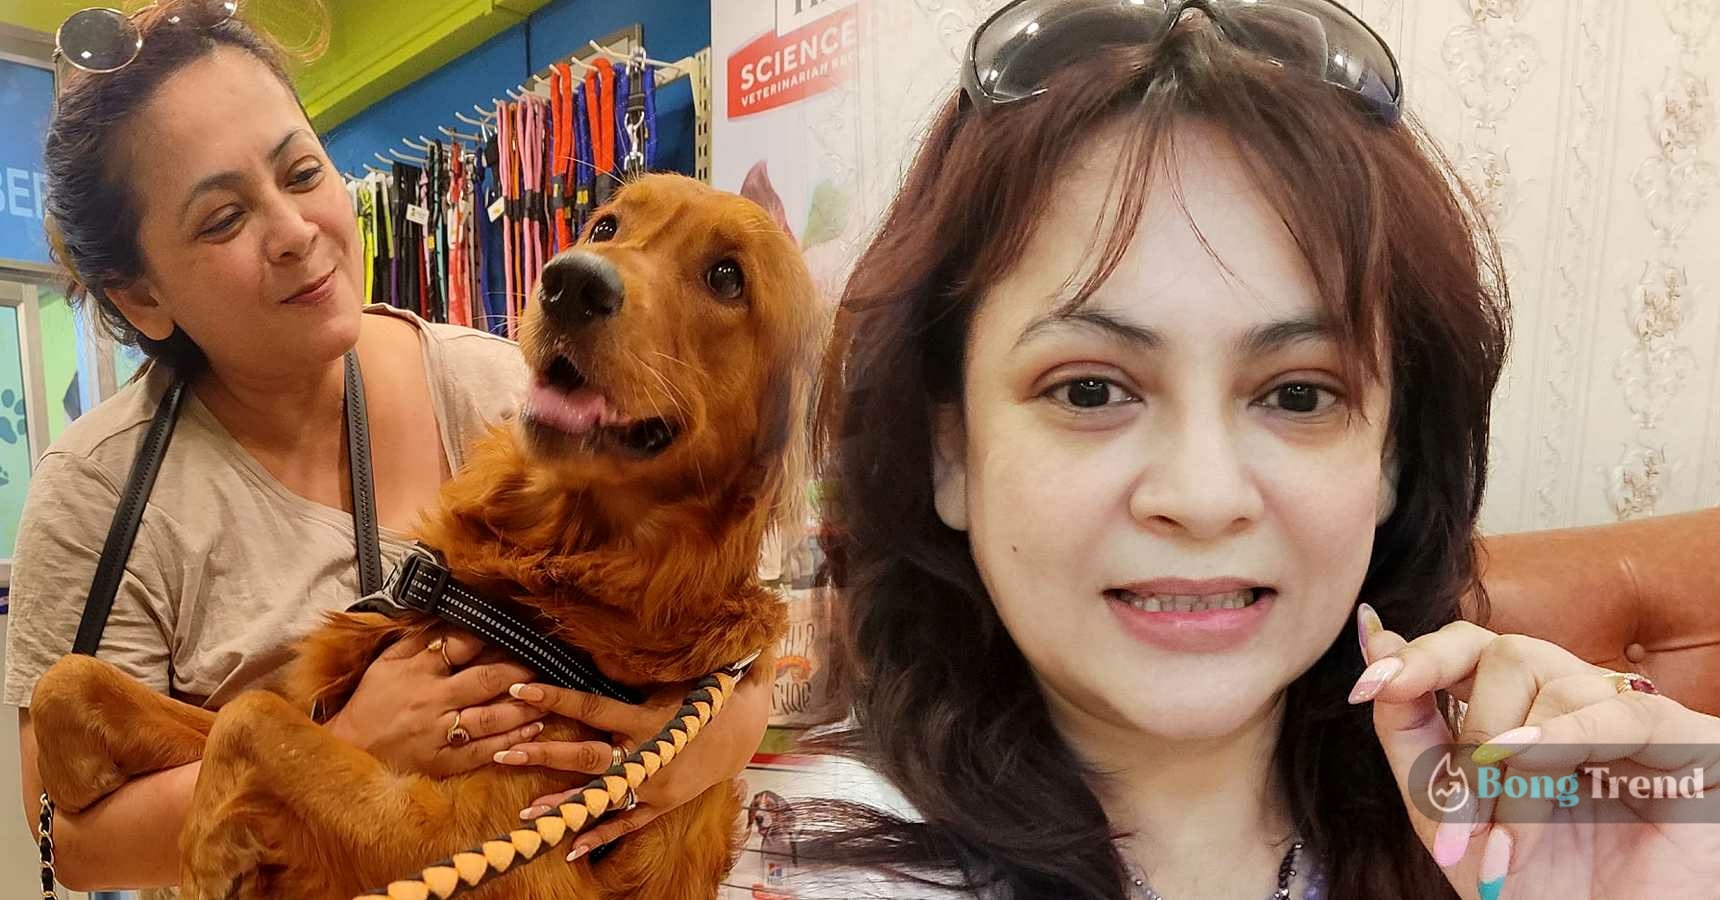 Sreelekha Mitra's said that she will not tollerate any kind of cruelty with animals